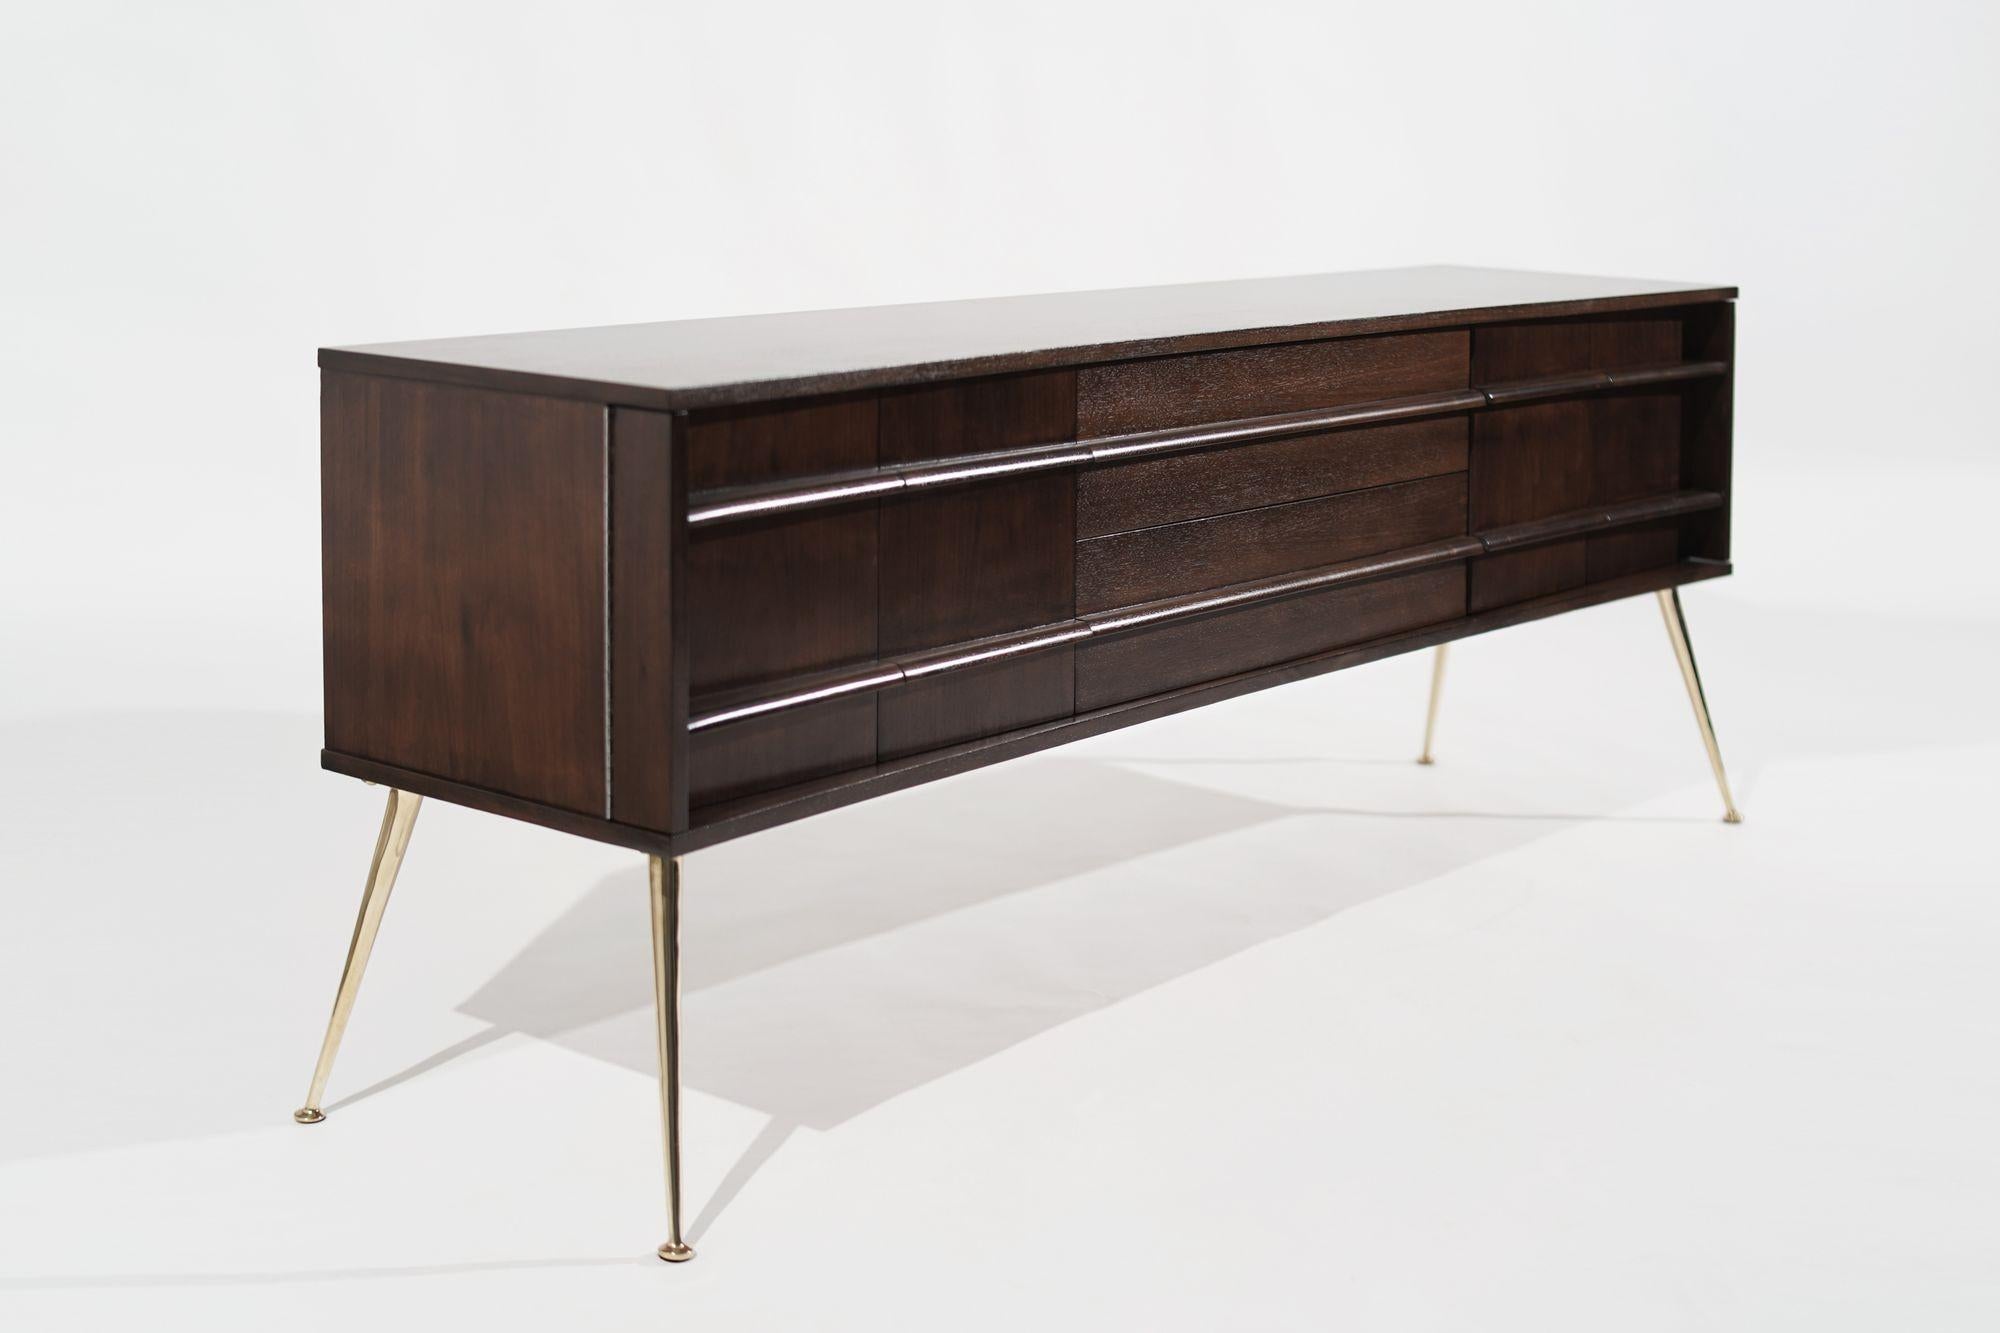 Timeless elegance and mid-century sophistication: A meticulously restored United Furniture Credenza from the 1960s, masterfully revived by Stamford Modern. This exquisite piece showcases the perfect marriage of form and function, boasting a stunning